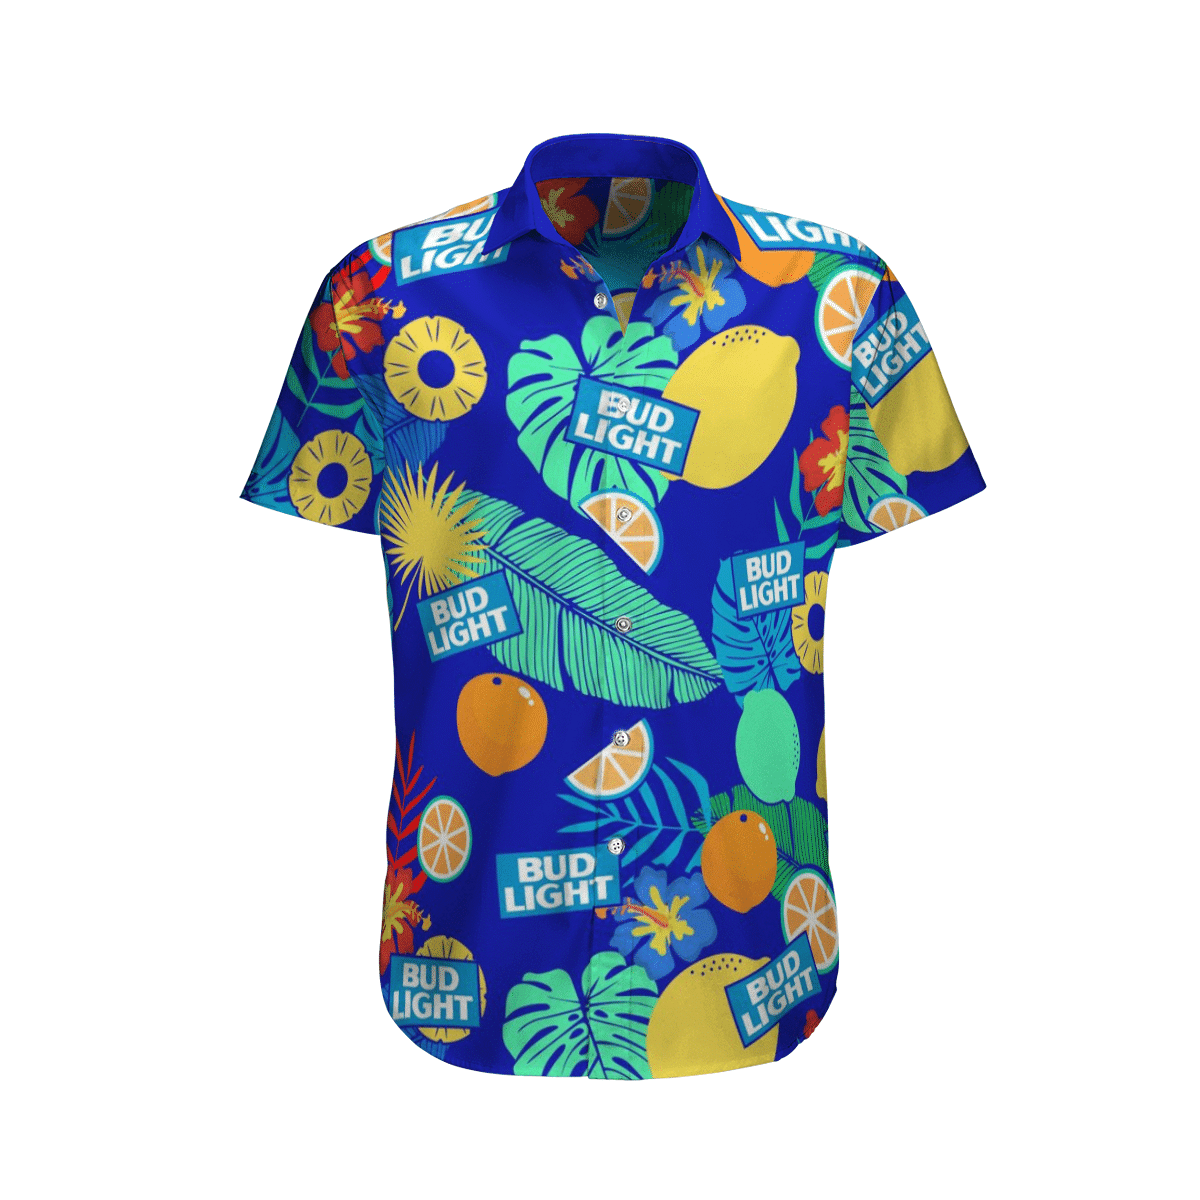 Top cool Hawaiian shirt 2022 - Make sure you get yours today before they run out! 13